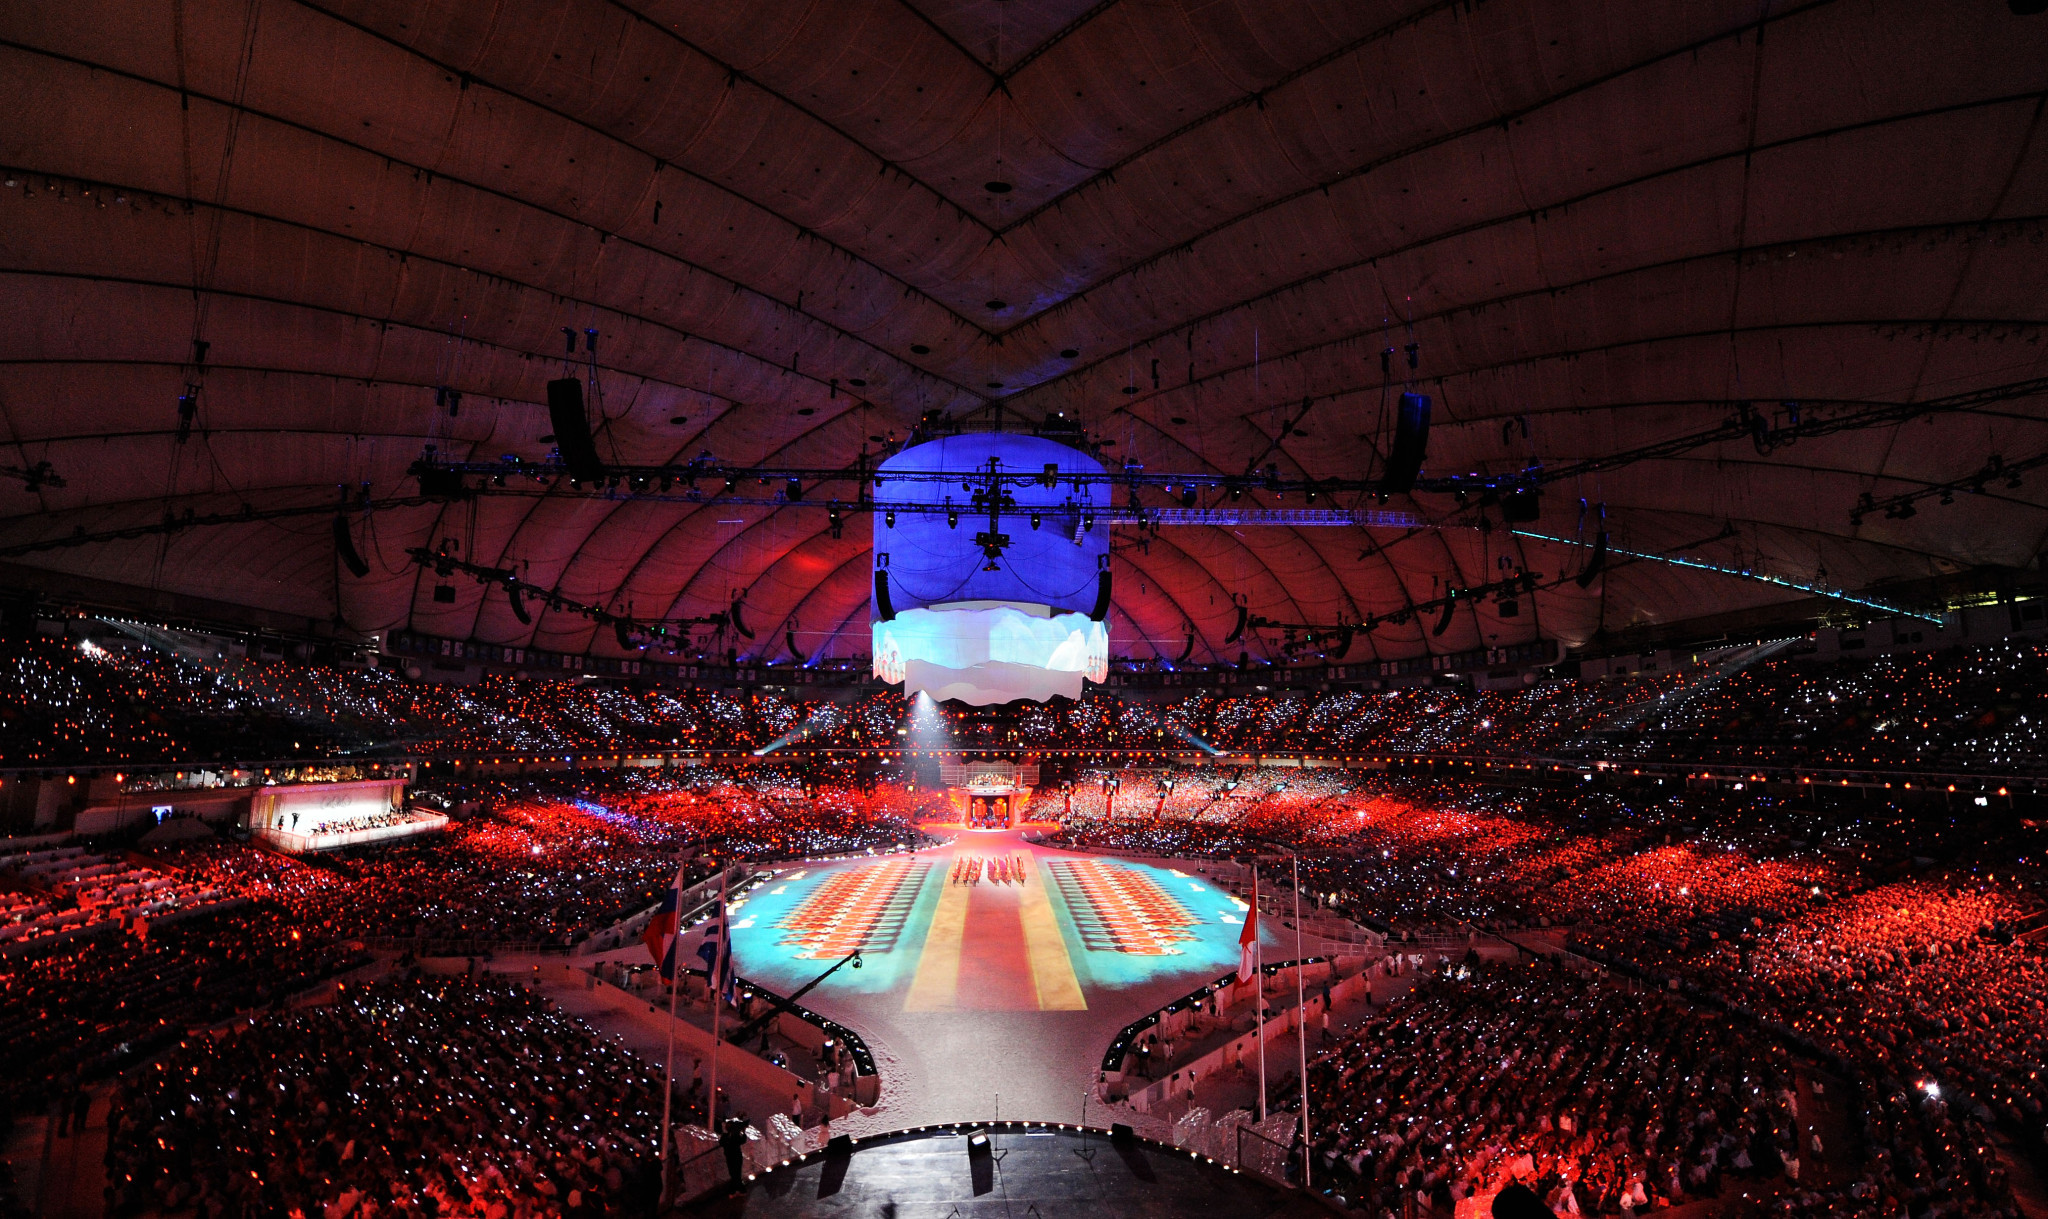 Vancouver in Canada previously hosted the Winter Olympics in 2010 ©Getty Images